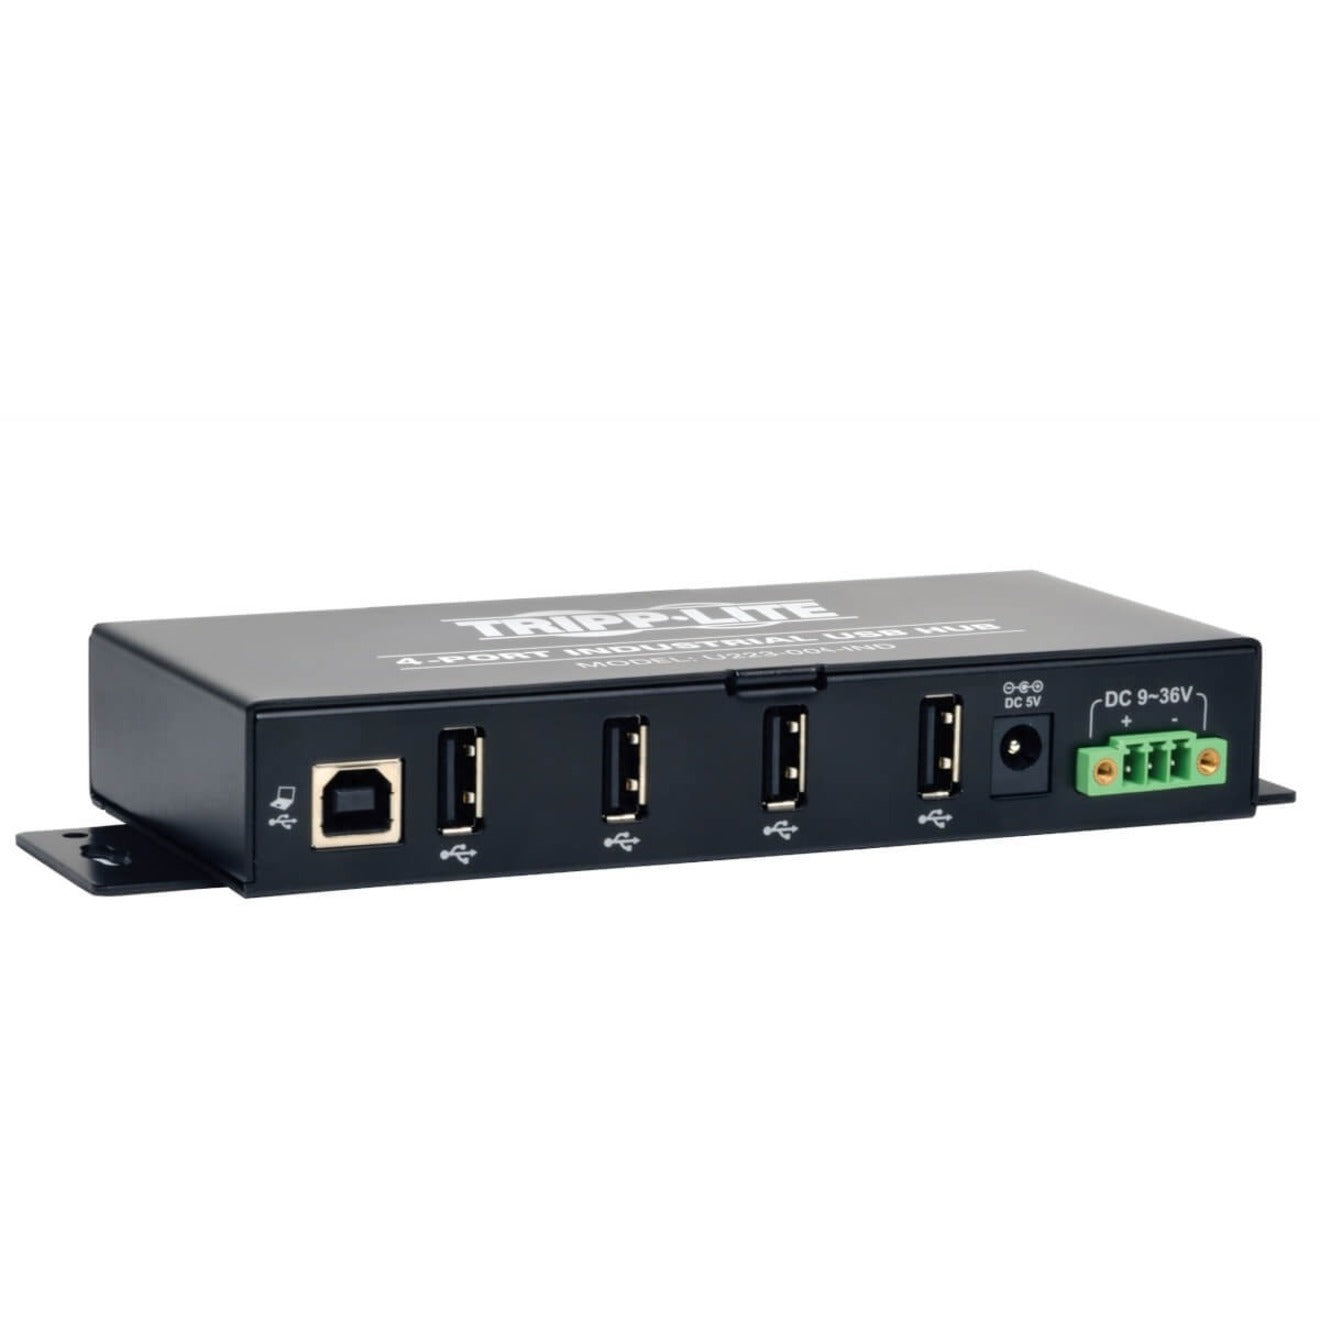 Tripp Lite U223-004-IND 4-Port Industrial USB 2.0 Hub with 15kV ESD Immunity, Reliable and Durable USB Hub for Industrial Use